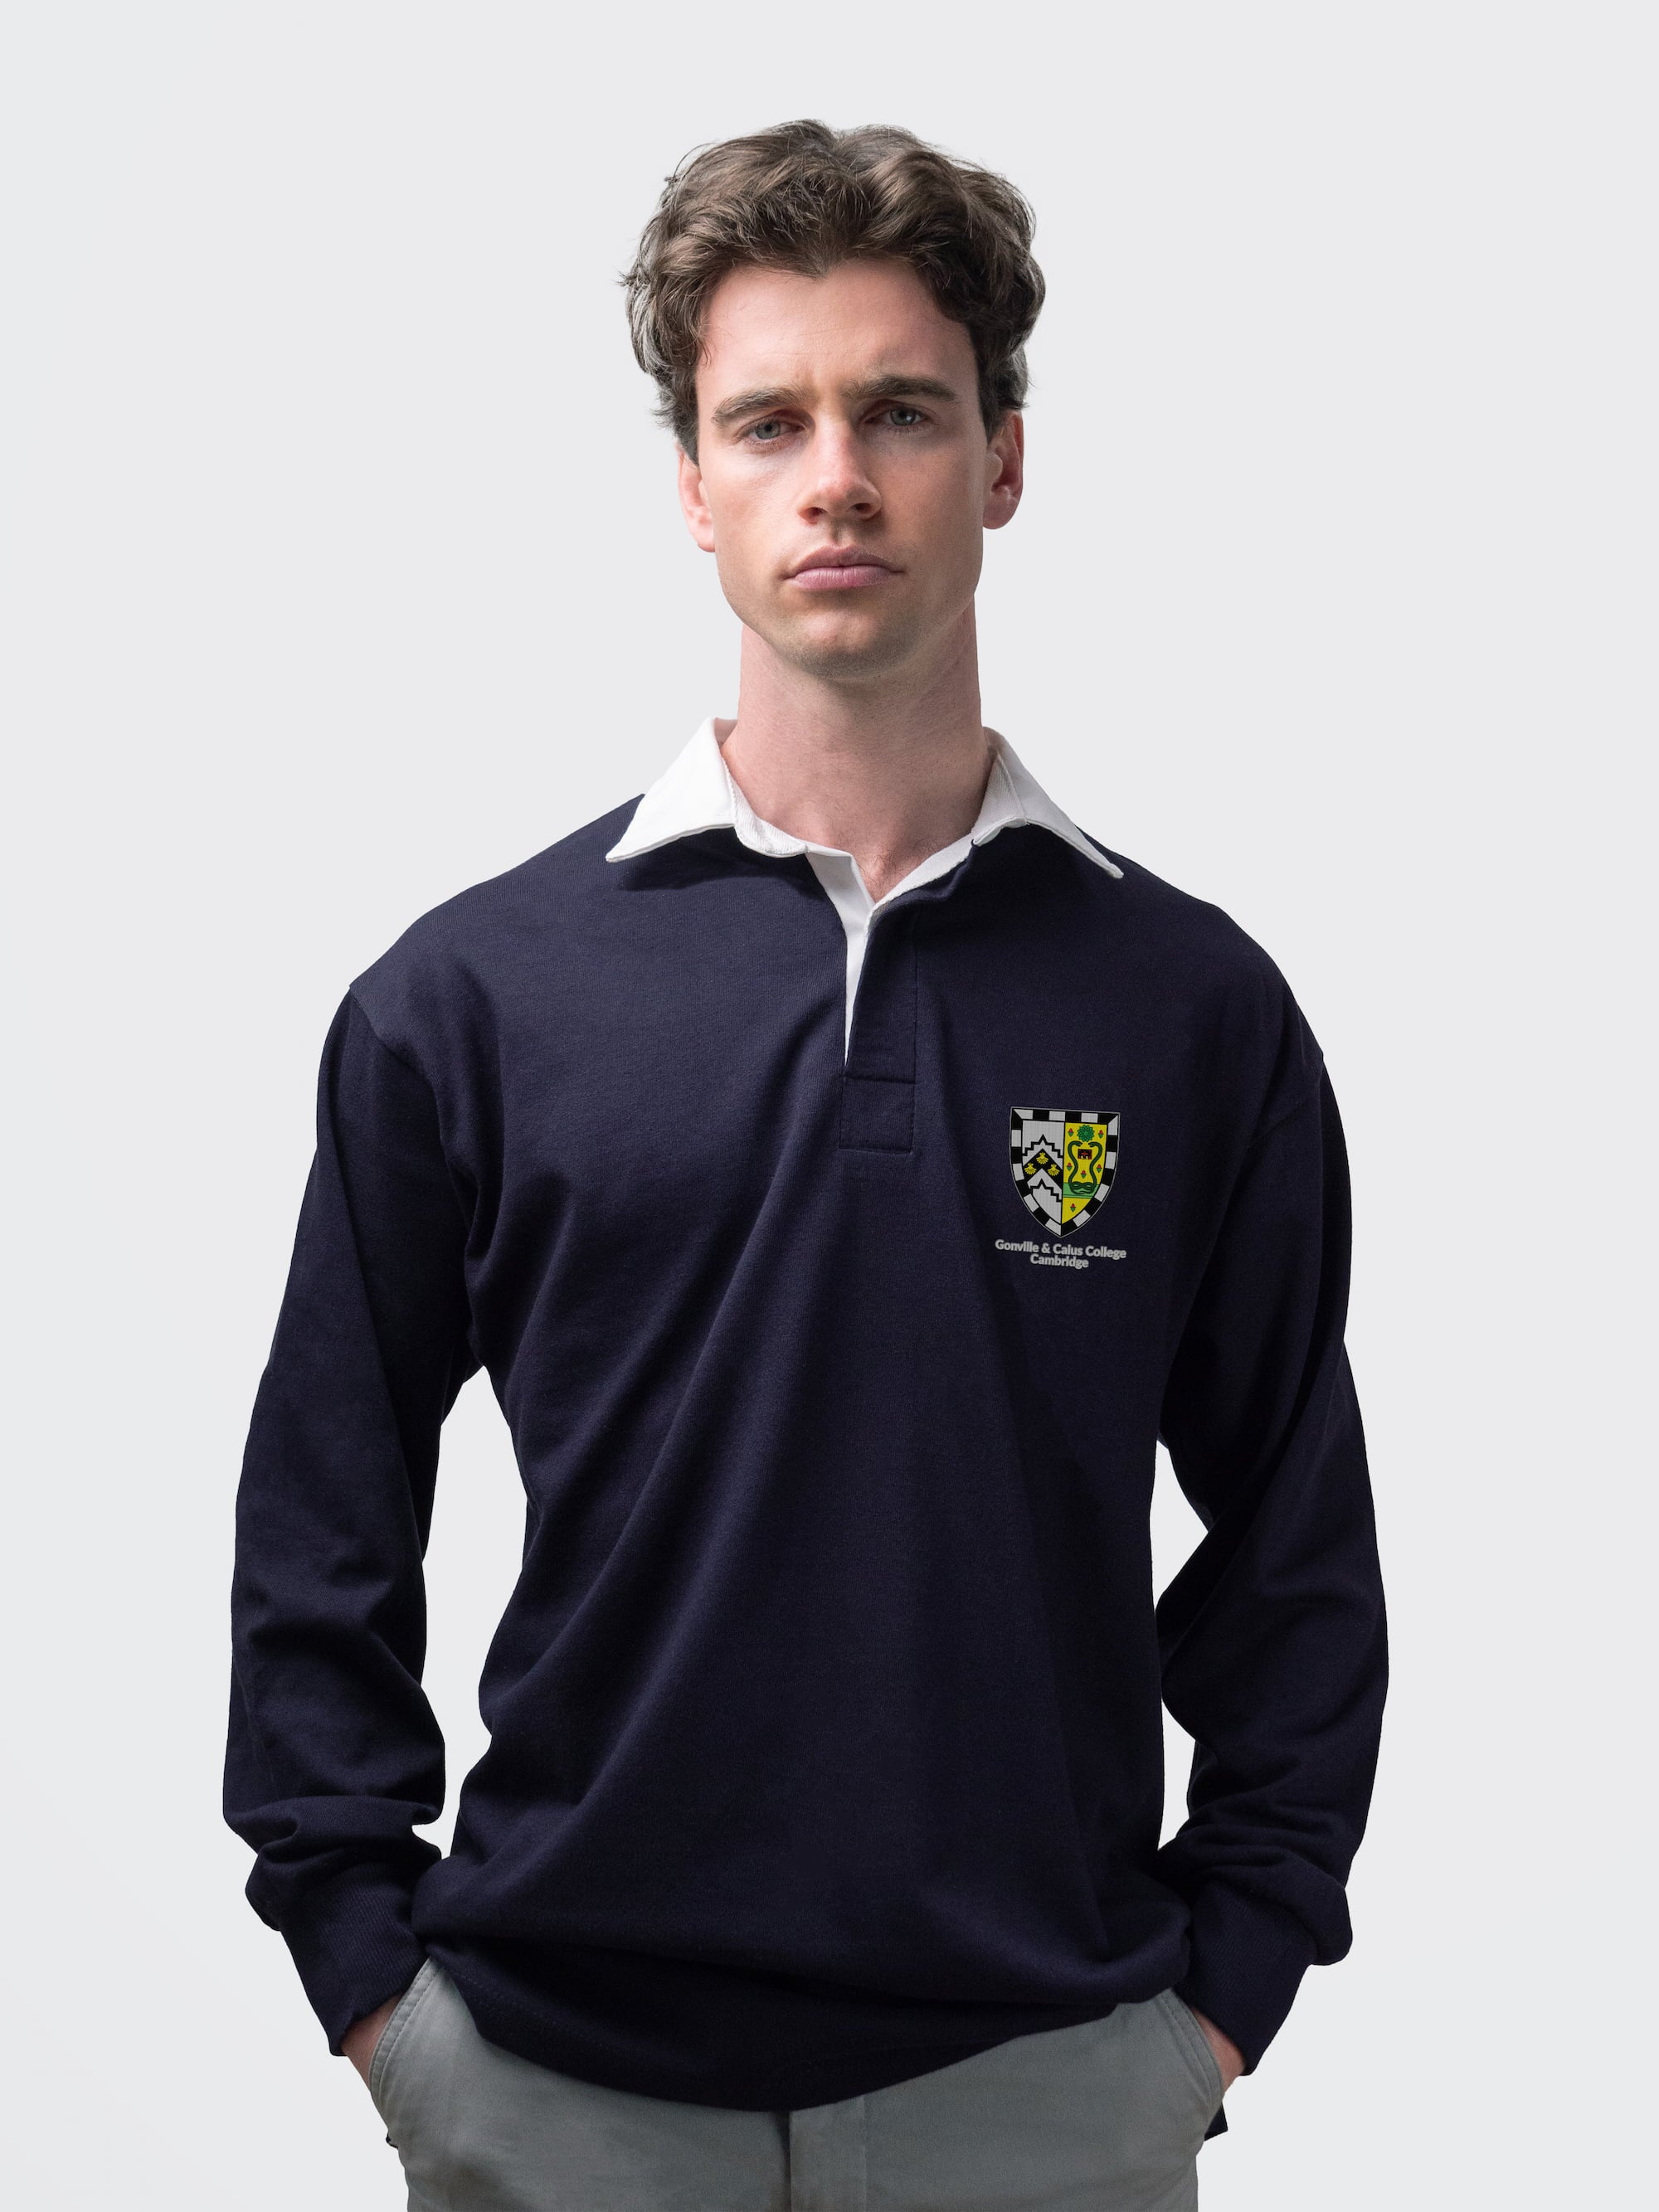 Gonville & Caius student wearing an embroidered mens rugby shirt in navy